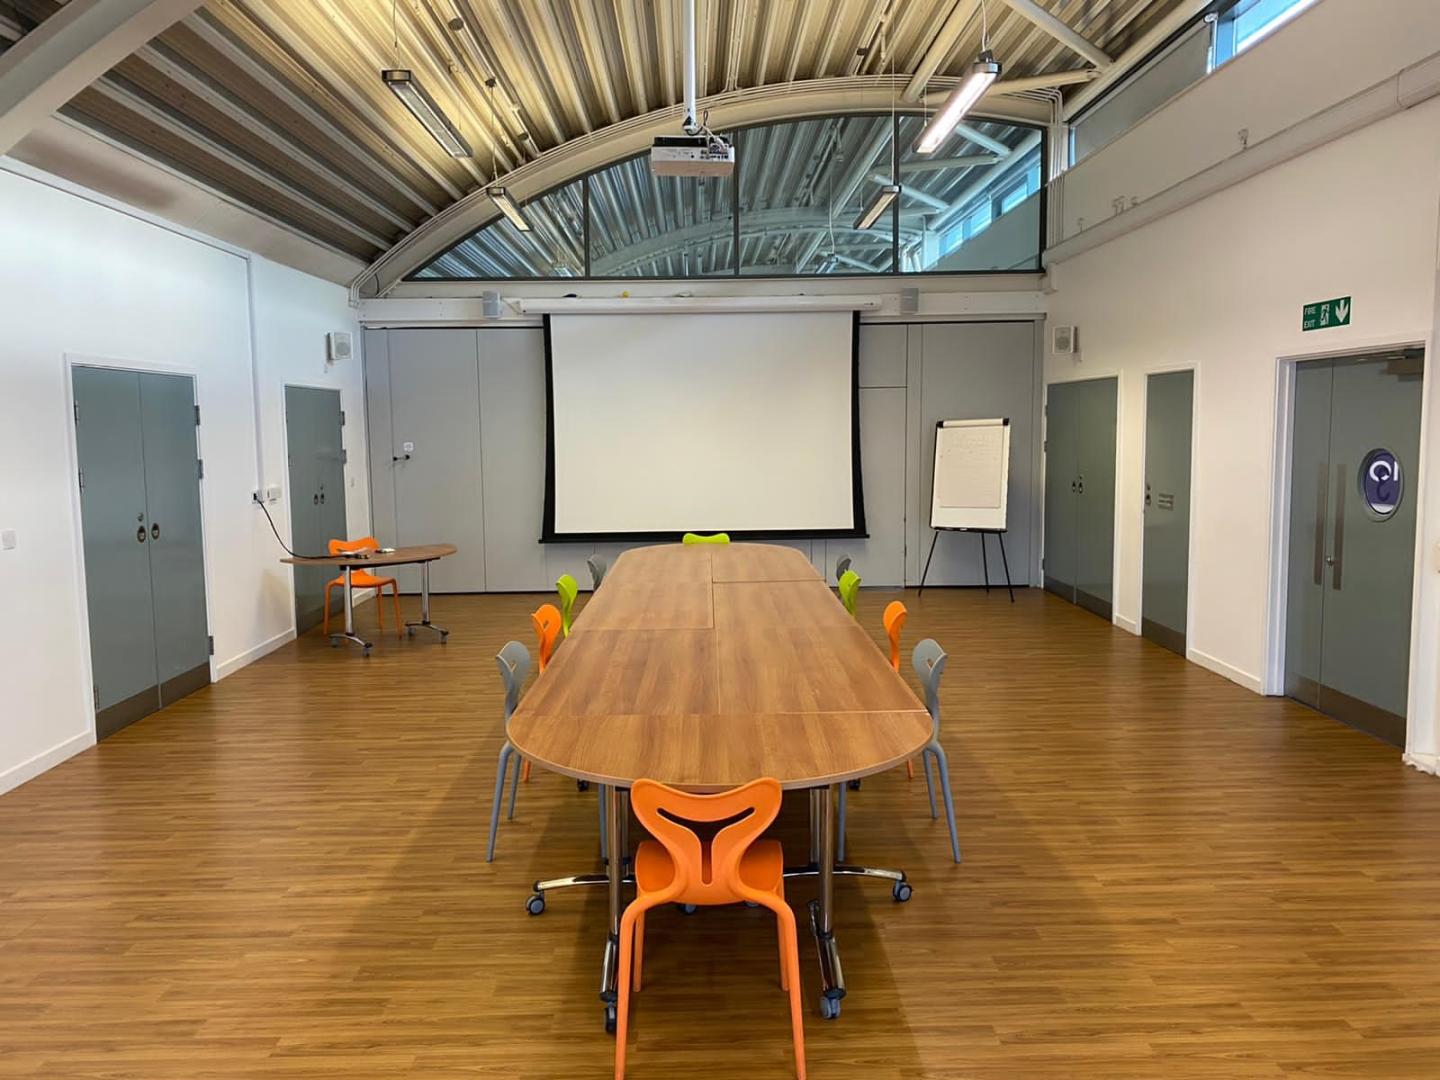 A conference room with wooden floors and a long wooden table with orange chairs